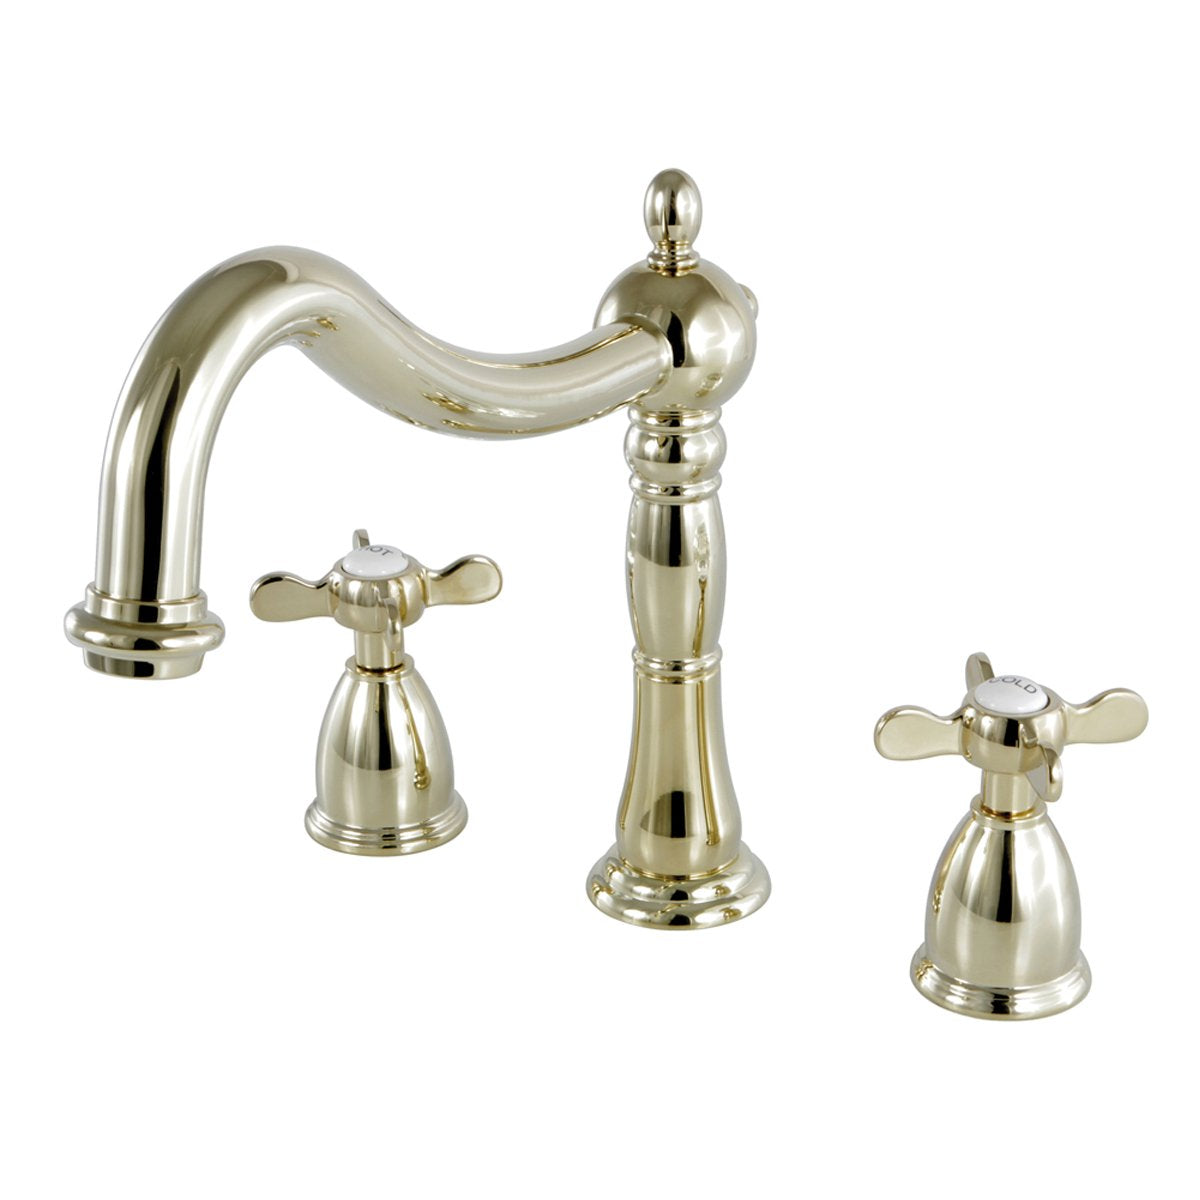 Kingston Brass Essex Classic Roman Tub Filler with Cross Handle-Tub Faucets-Free Shipping-Directsinks.